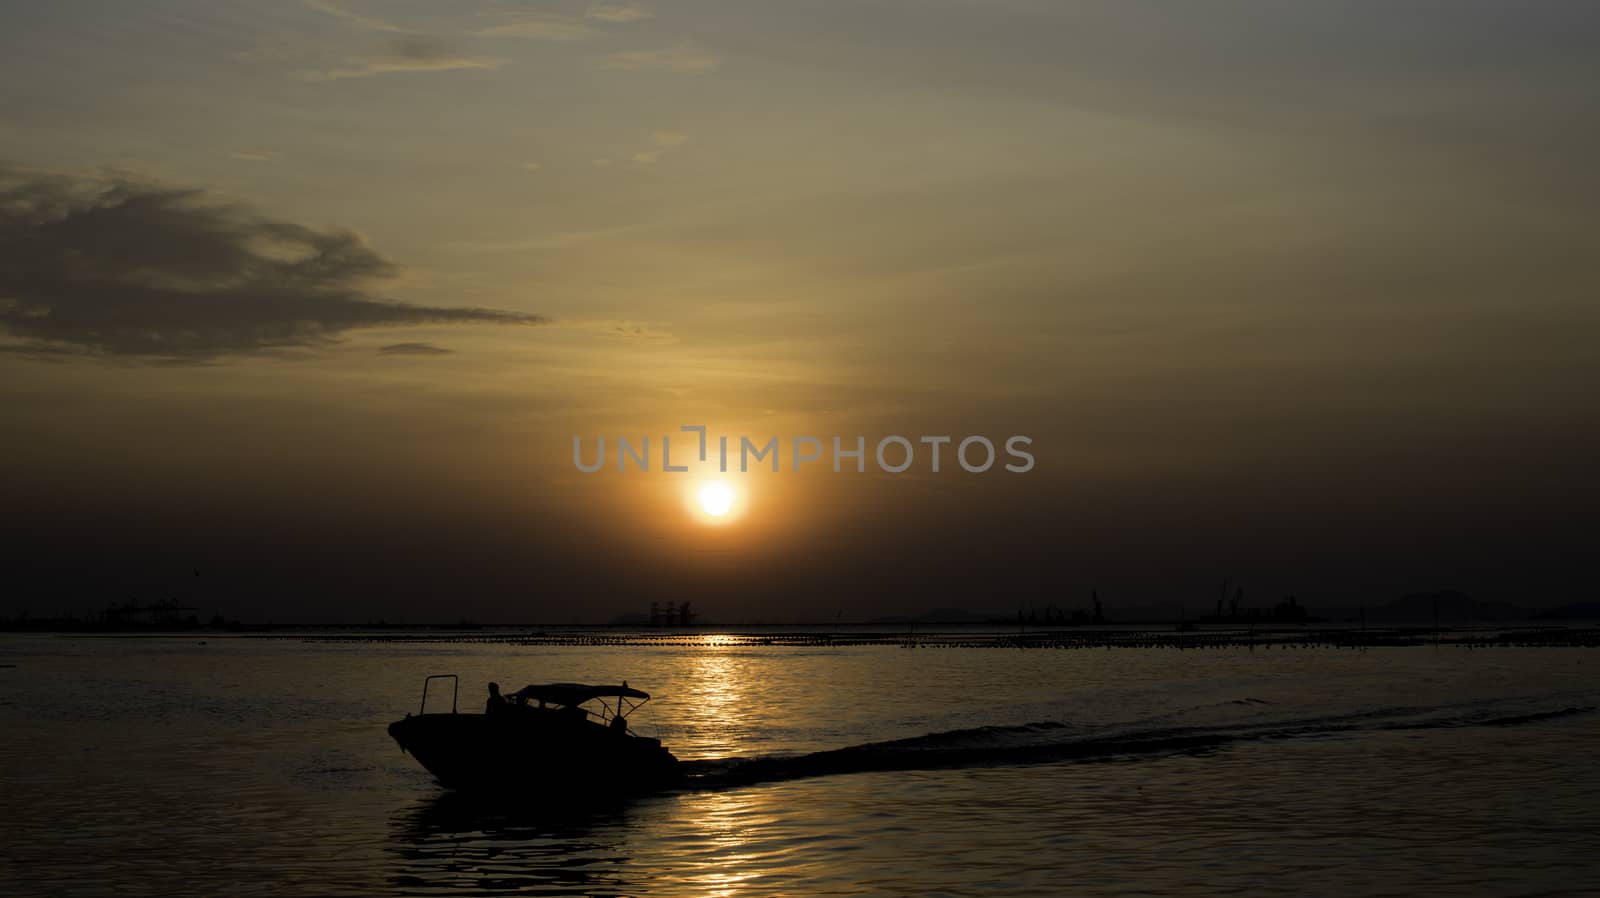 Speed boat silhouette in sea with sunset sky background